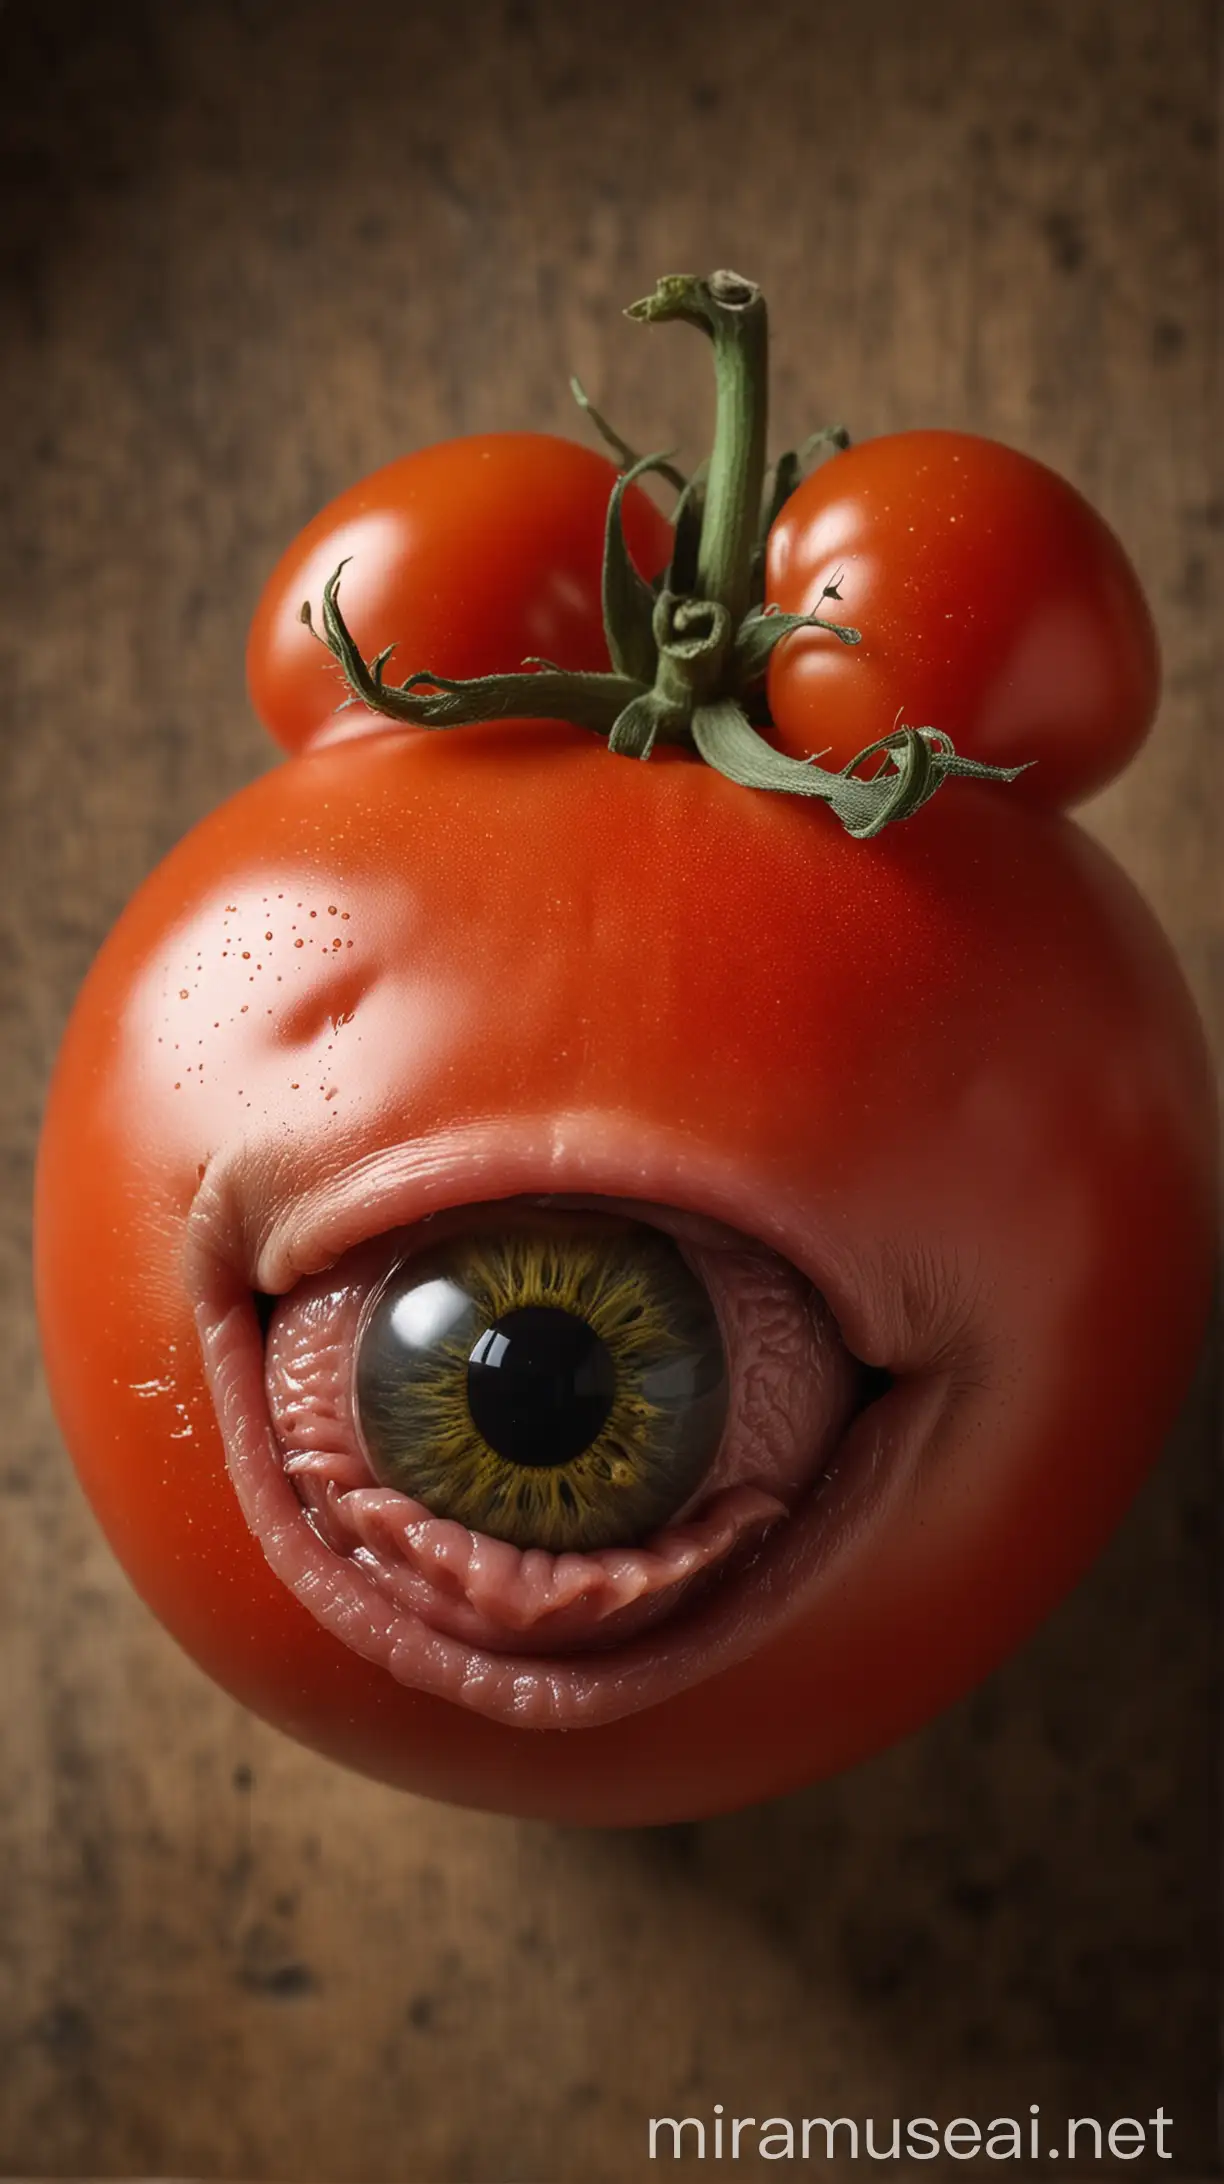 Tomato with SuperHuman Eyes and Pigs Mouth Surrealistic Vegetable Portrait